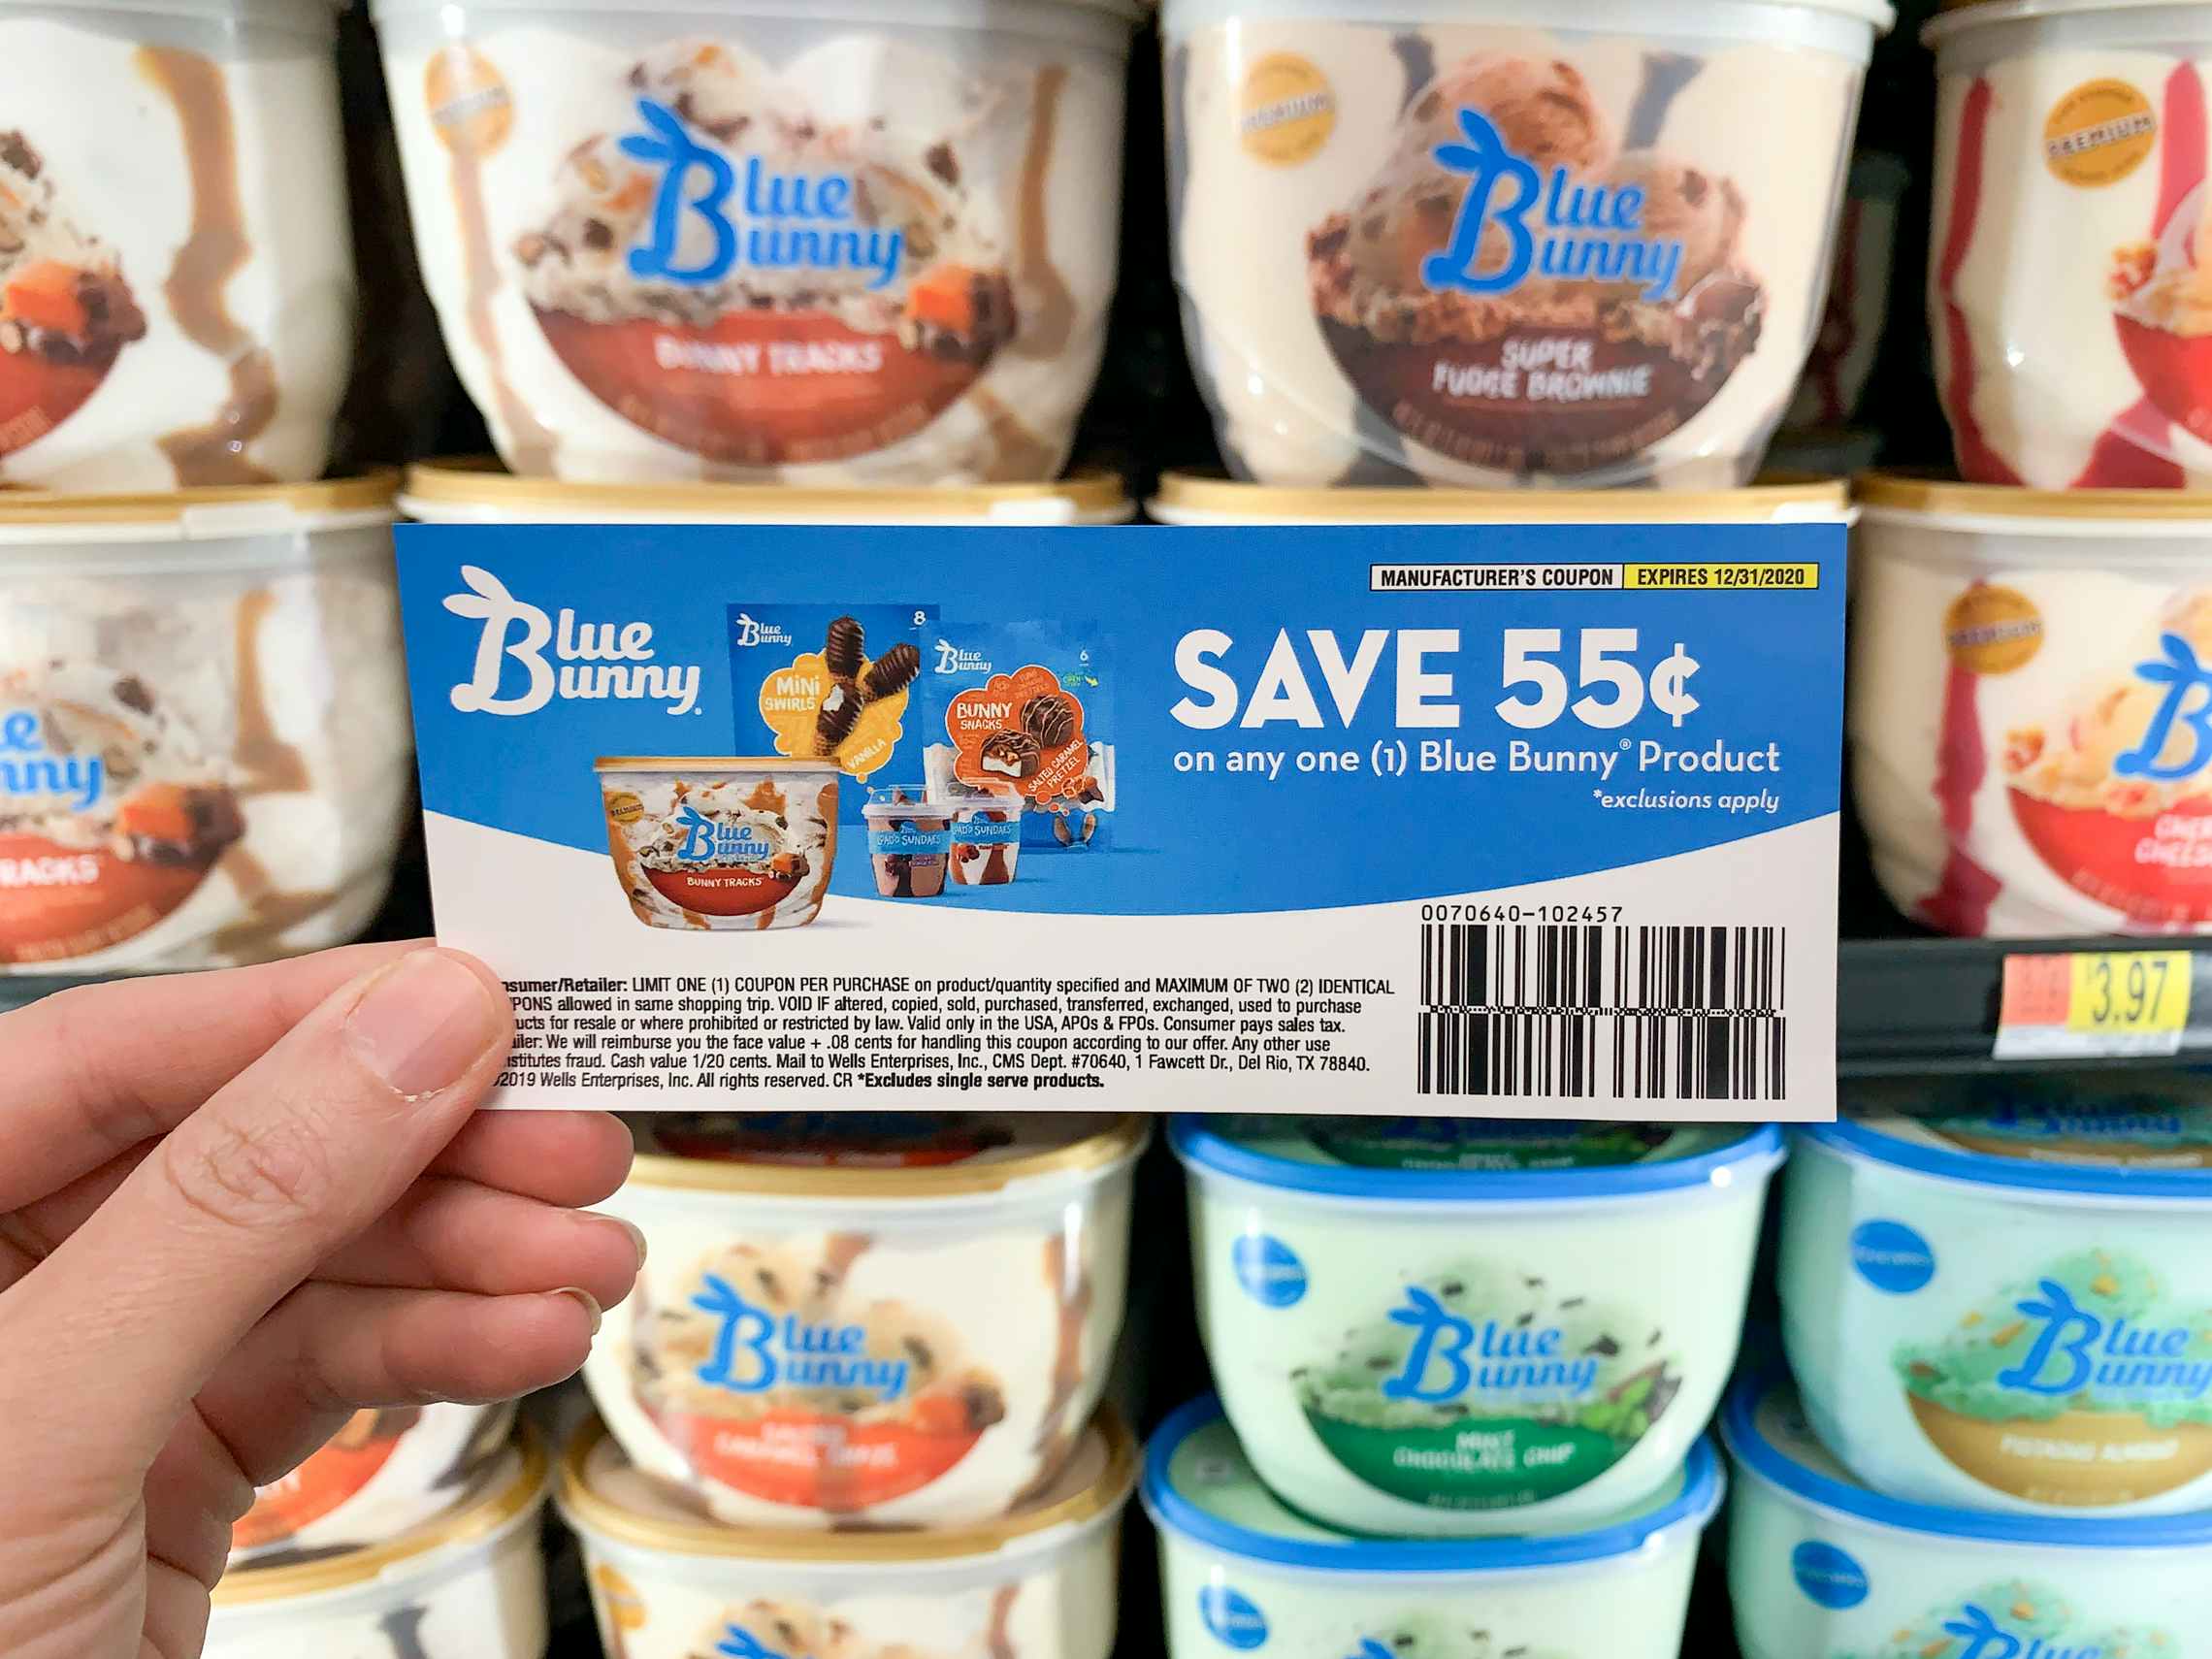 Blue Bunny Ice Cream coupon held in front of ice cream cooler in store.